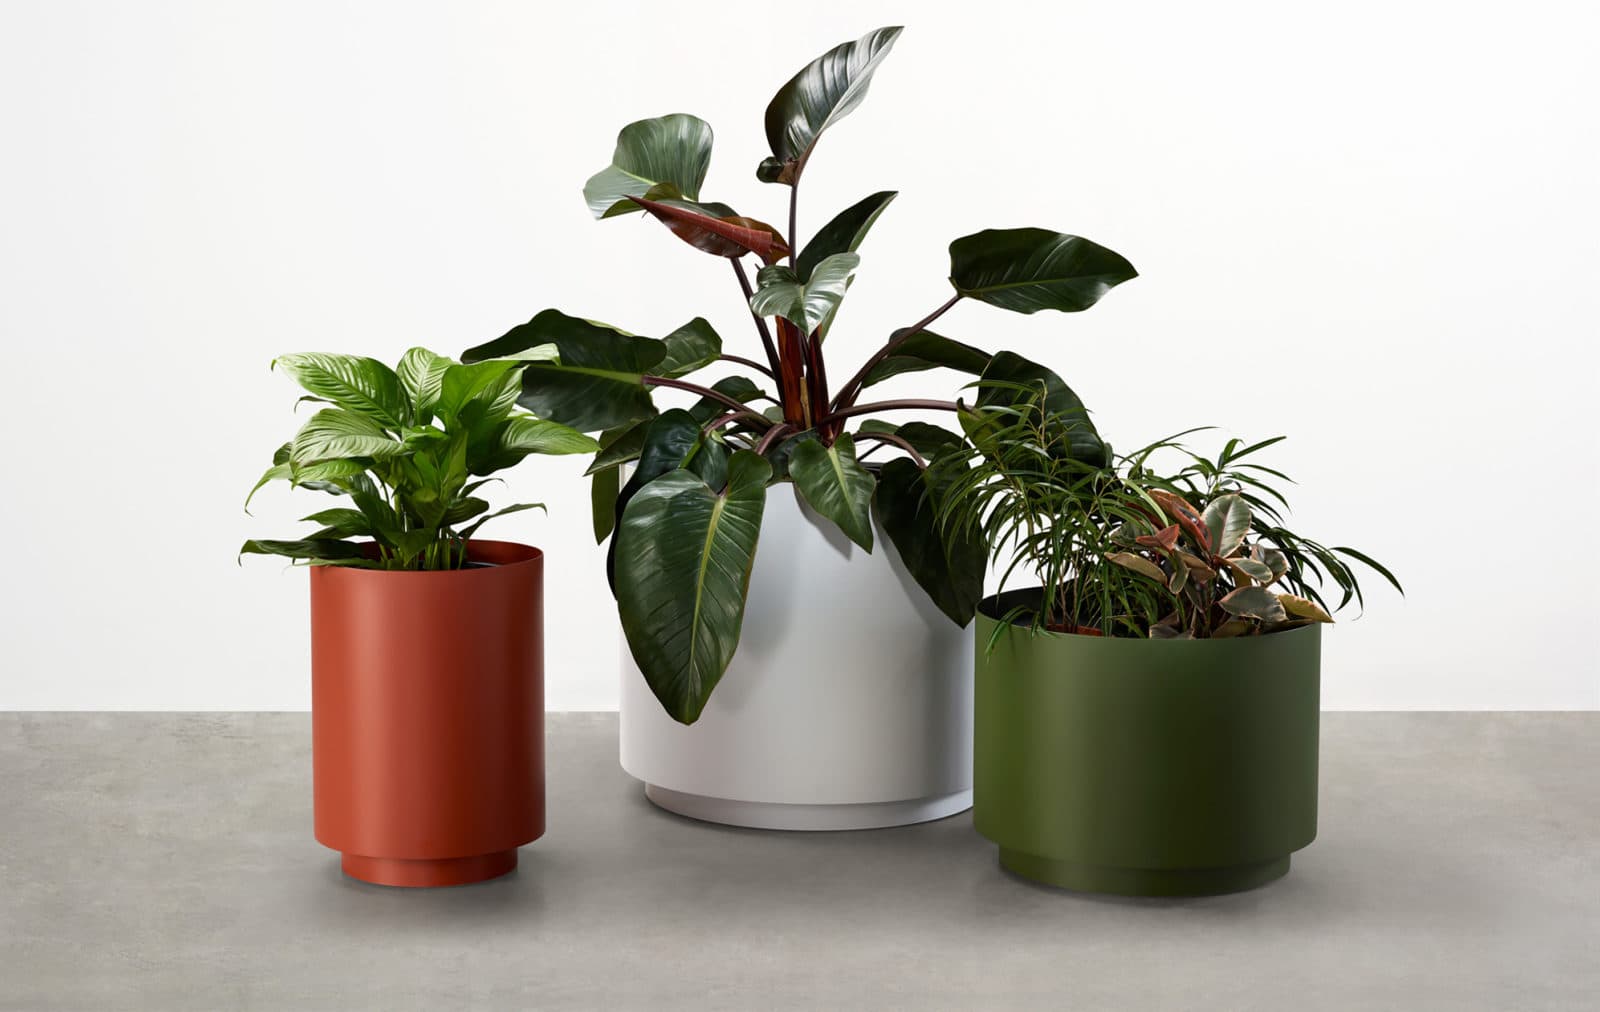 The smooth geometry of the Drum Planter defines this series of stylish contemporary indoor-outdoor planters at home or work, outdoors or in.